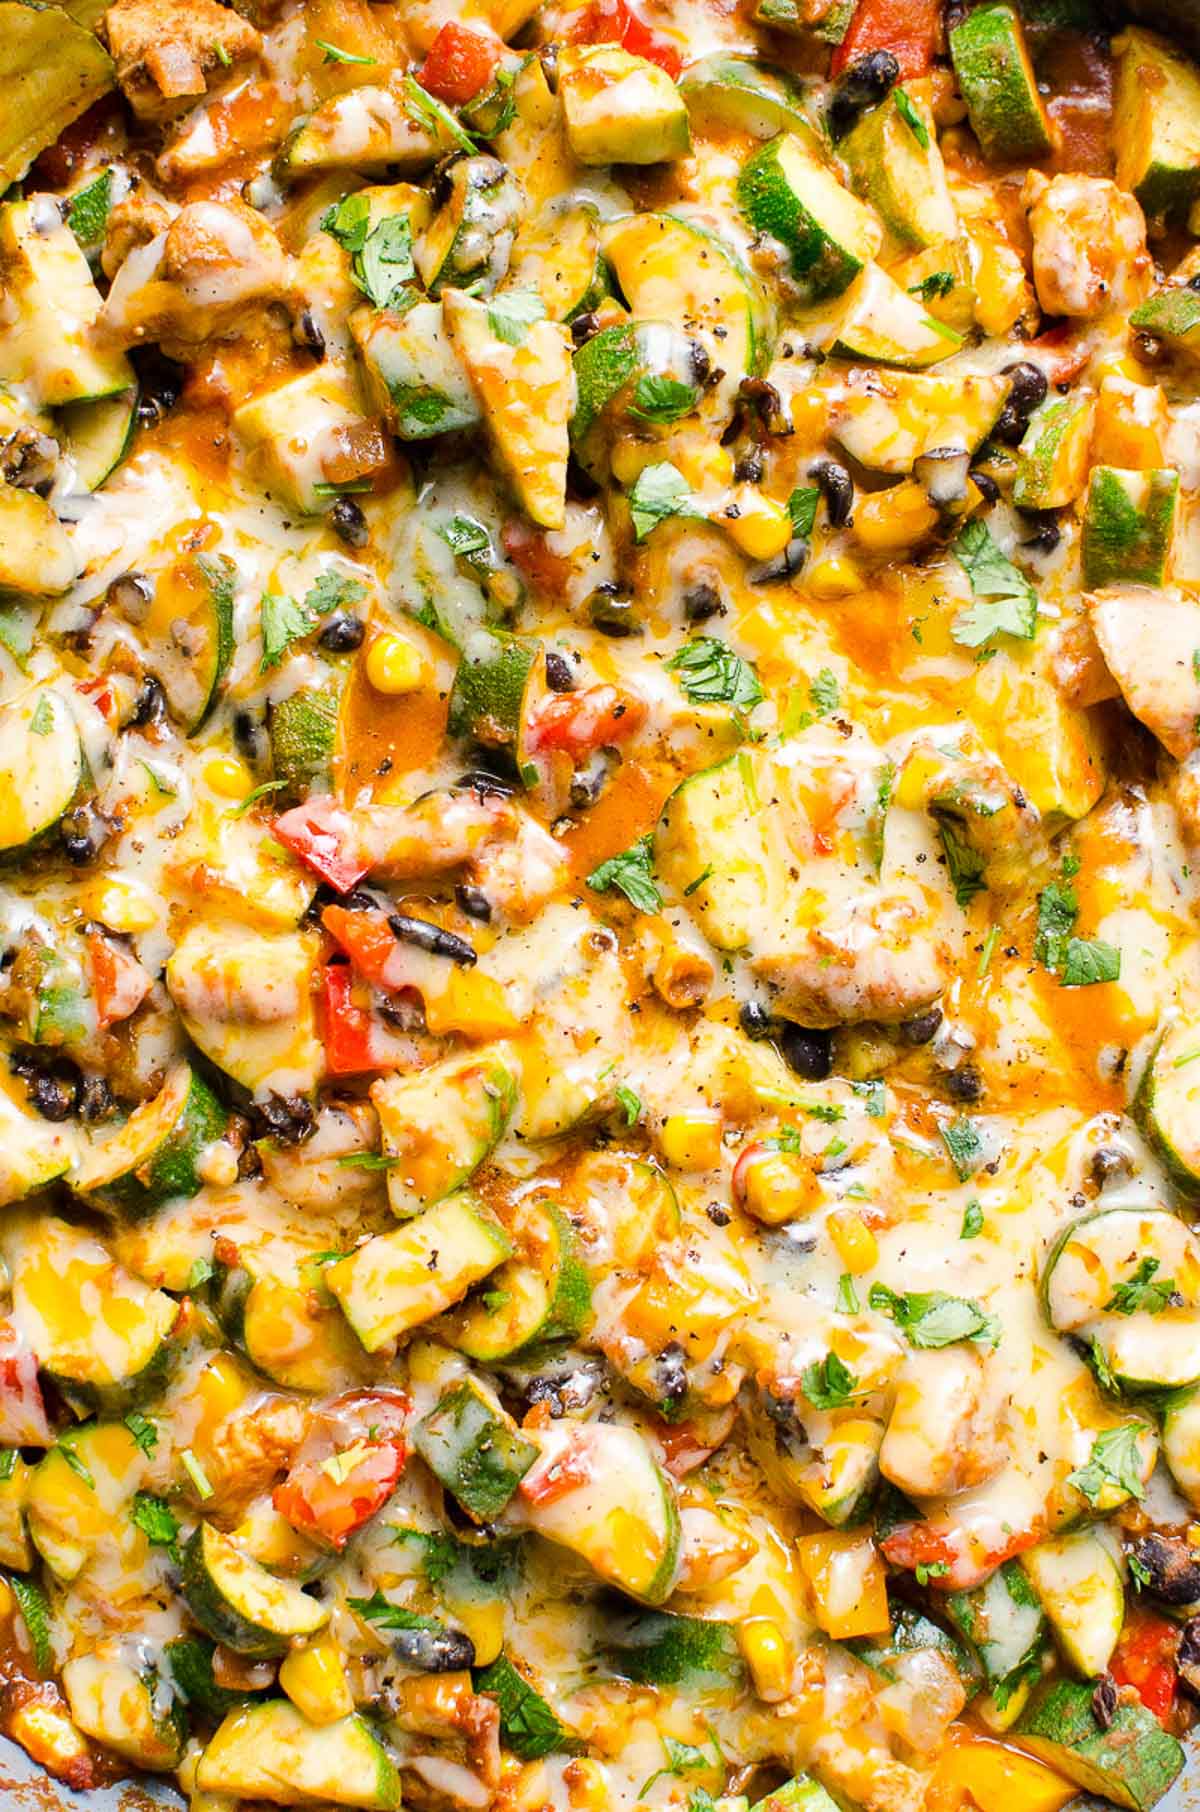 Closeup of Tex Mex chicken and zucchini recipe with corn and black beans topped with melted cheese.